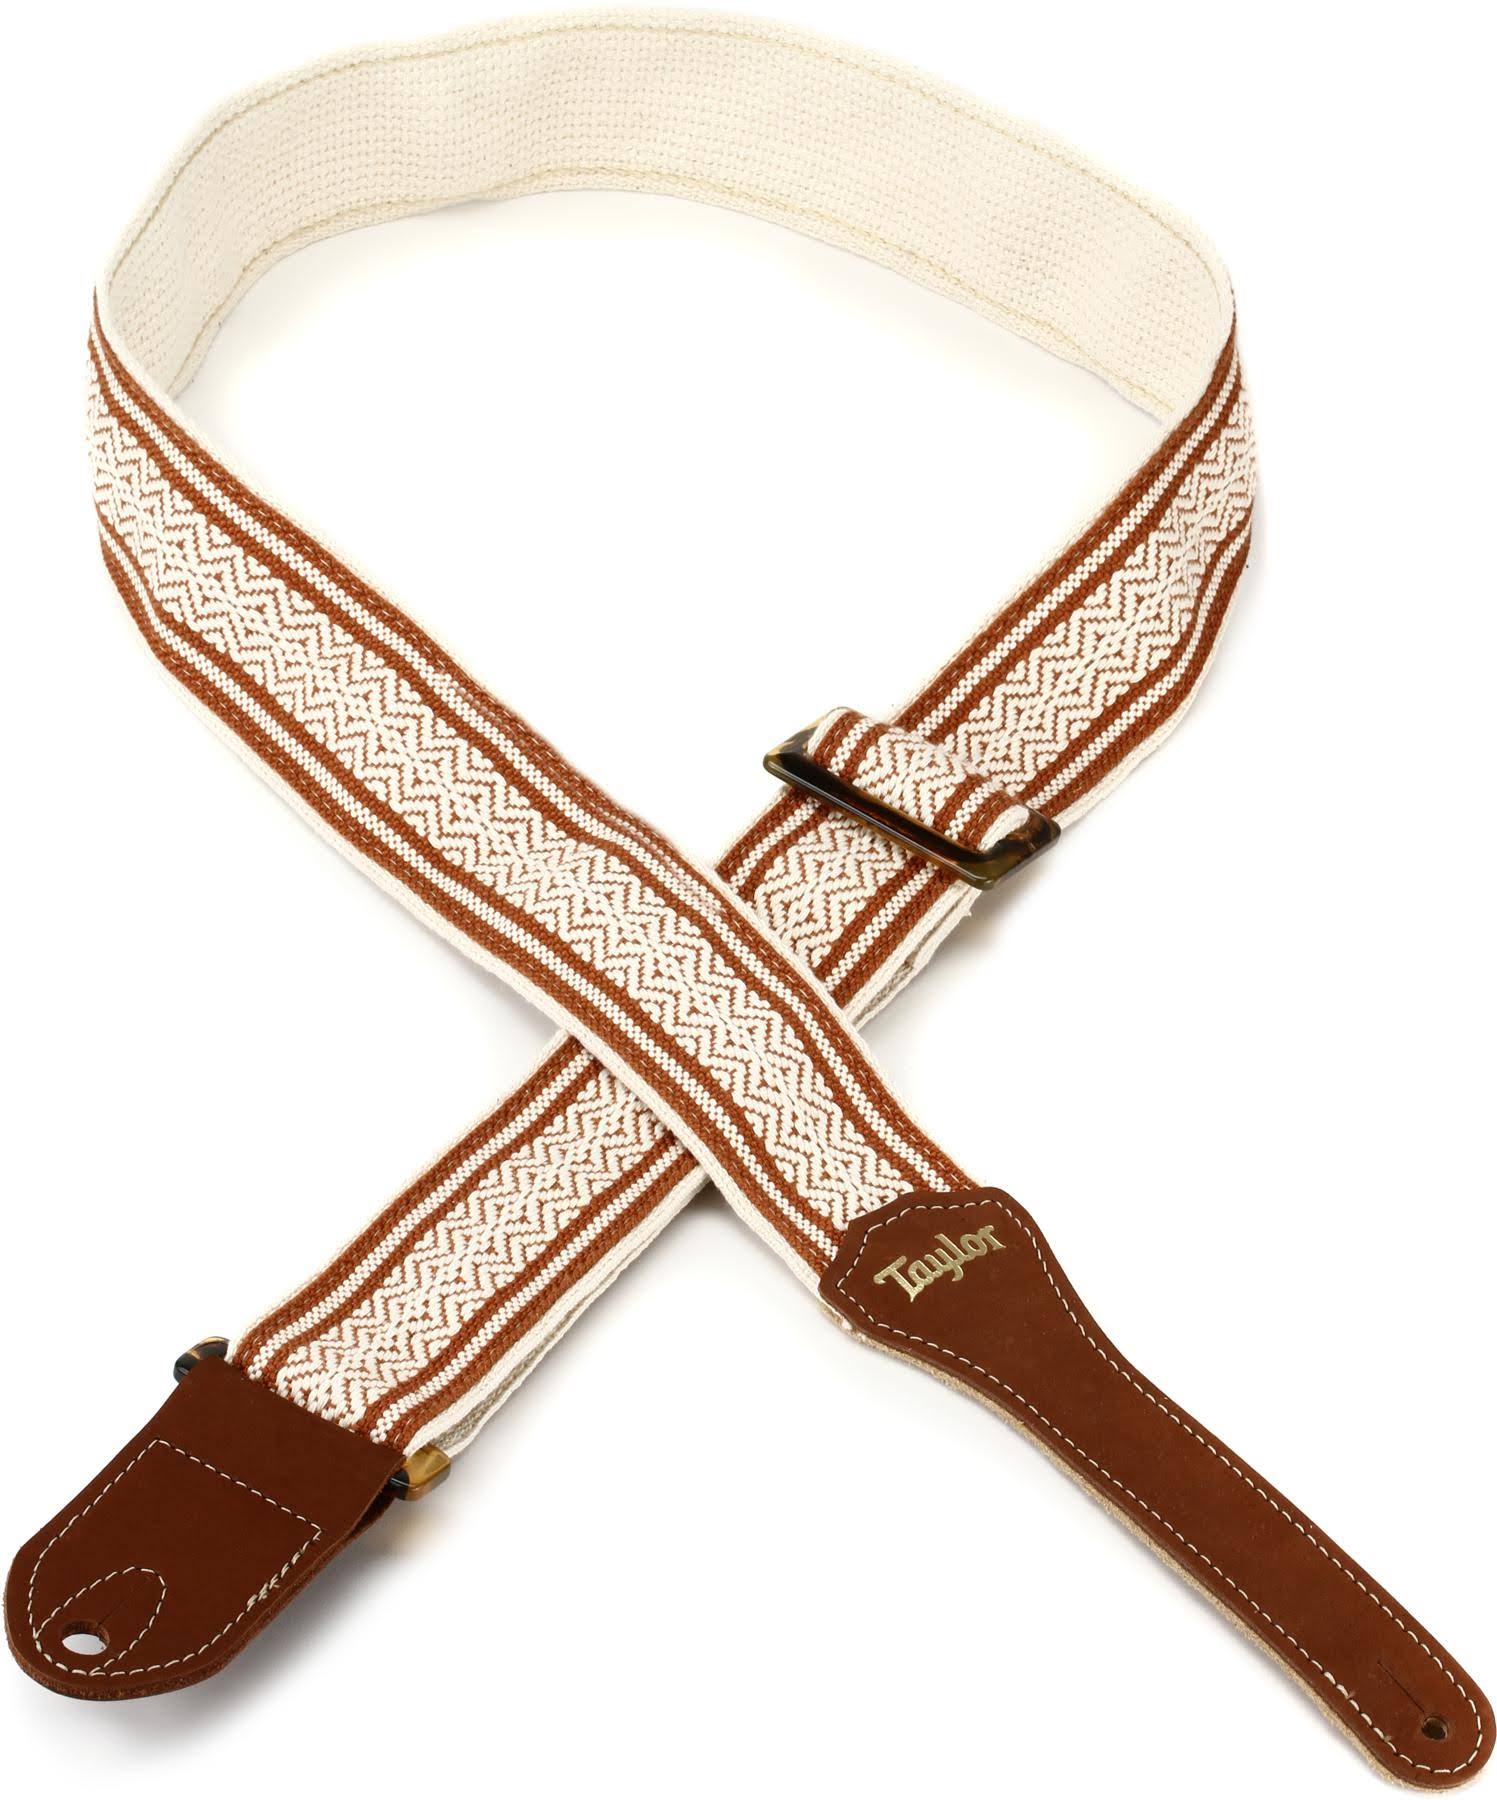 Taylor 2" Academy Jacquard Leather Guitar Strap White Brown